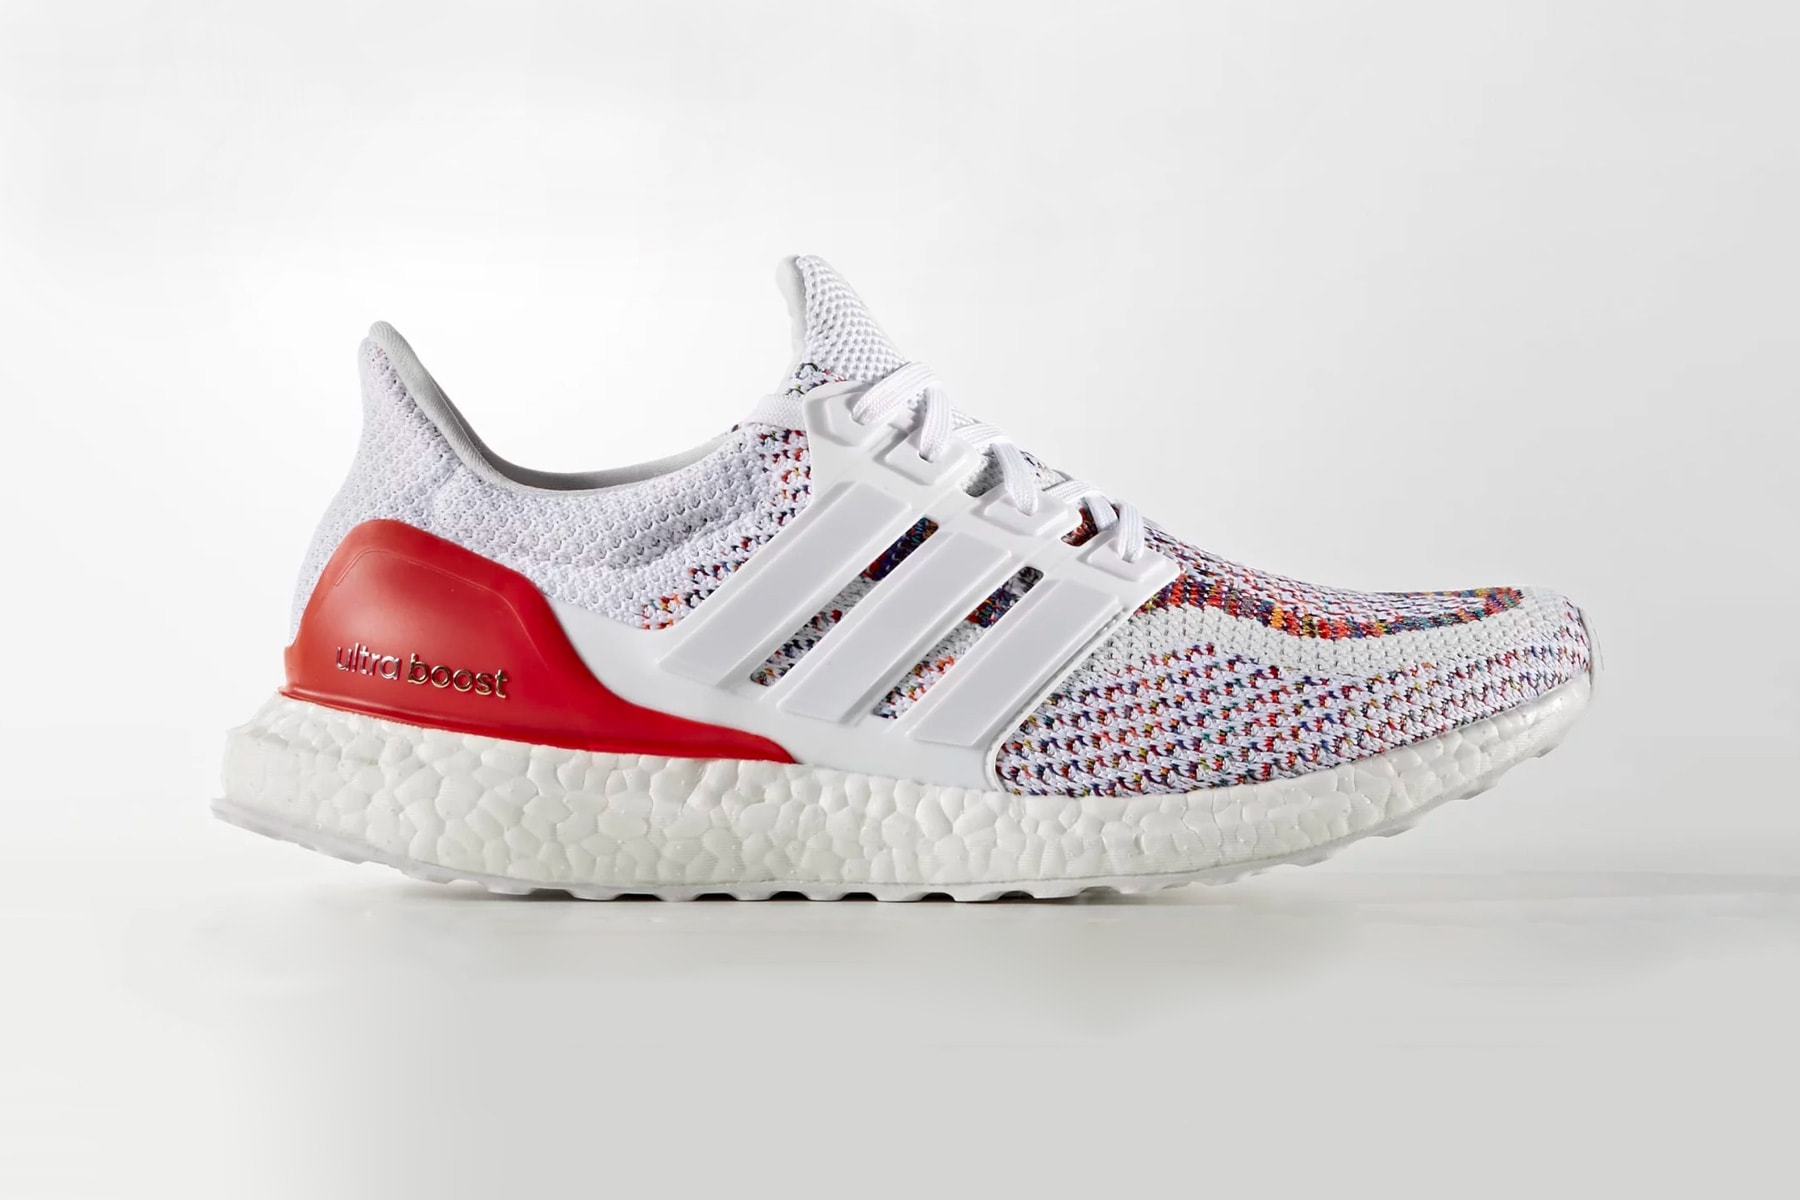 adidas UltraBOOST "Multicolor 2.0" Release Date colorway white sneaker multicolor red price info buy online purchase